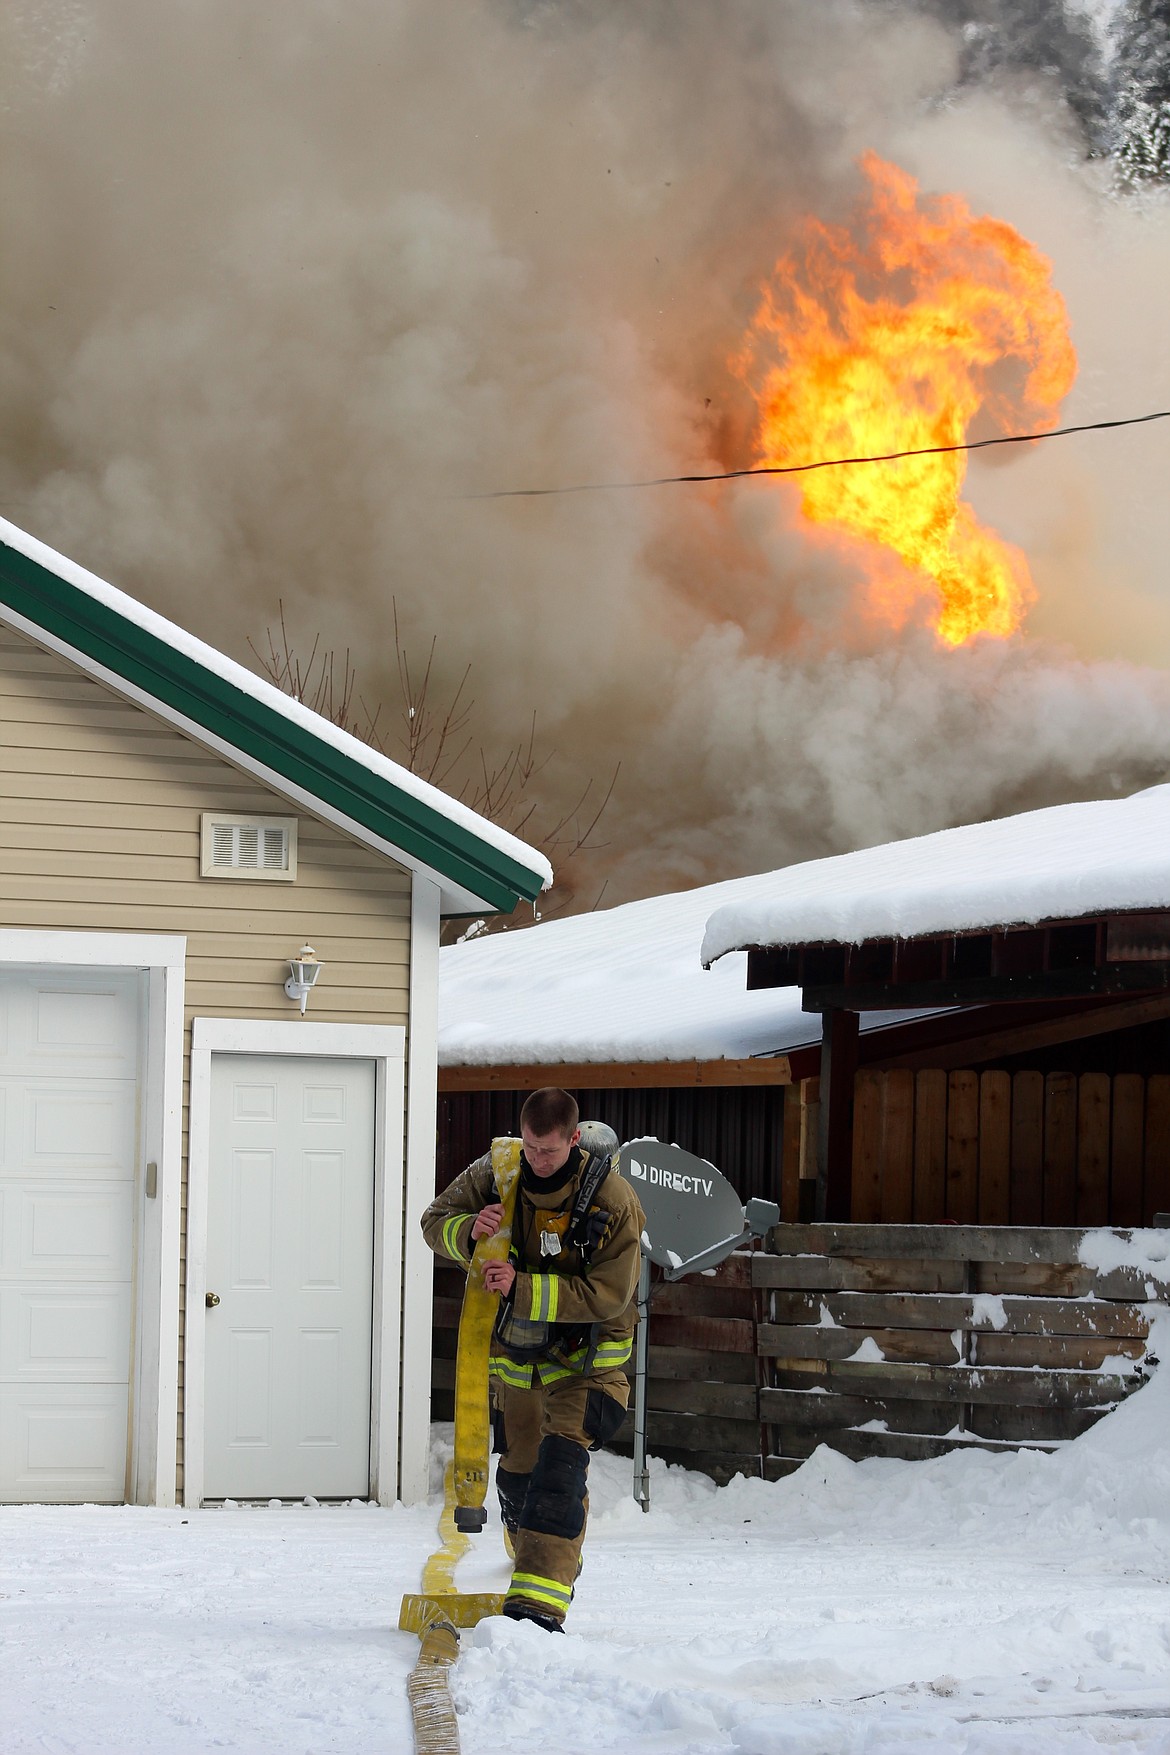 A firefighter carries a hose away from the fire as crews shift their focus to the rear of the house.